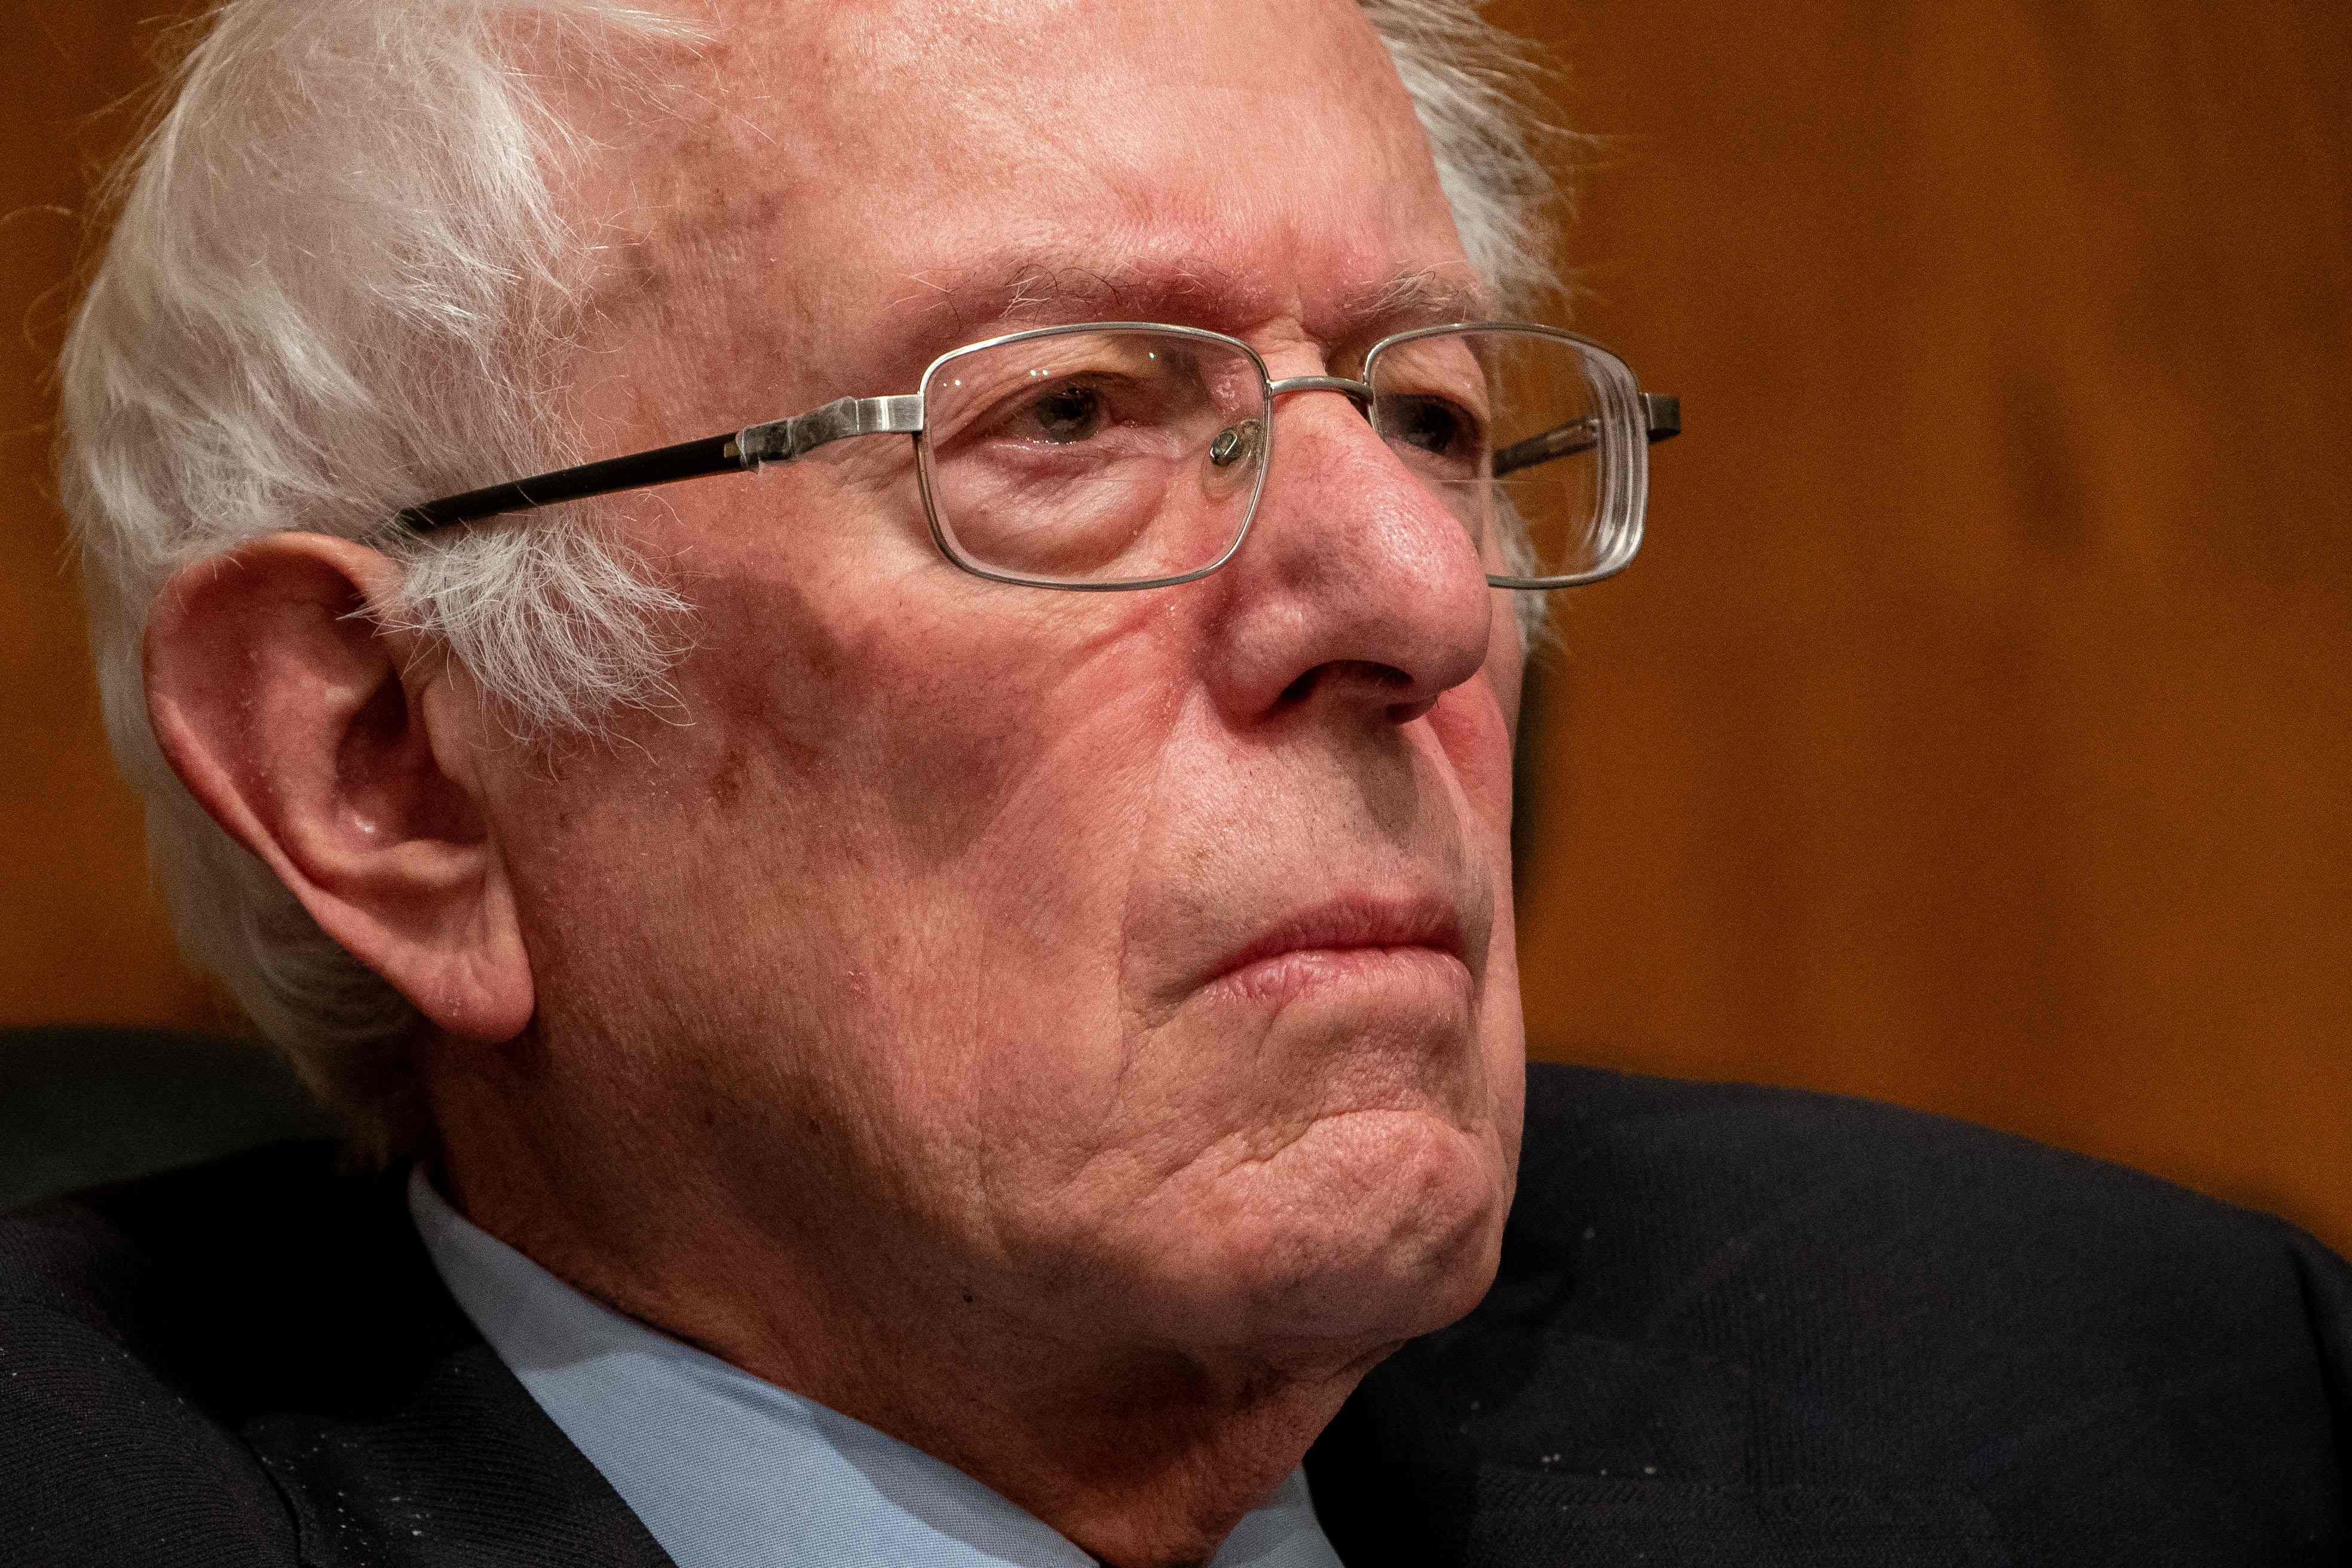 Bernie Sanders was running for Democratic presidential candidate when he received the prank call